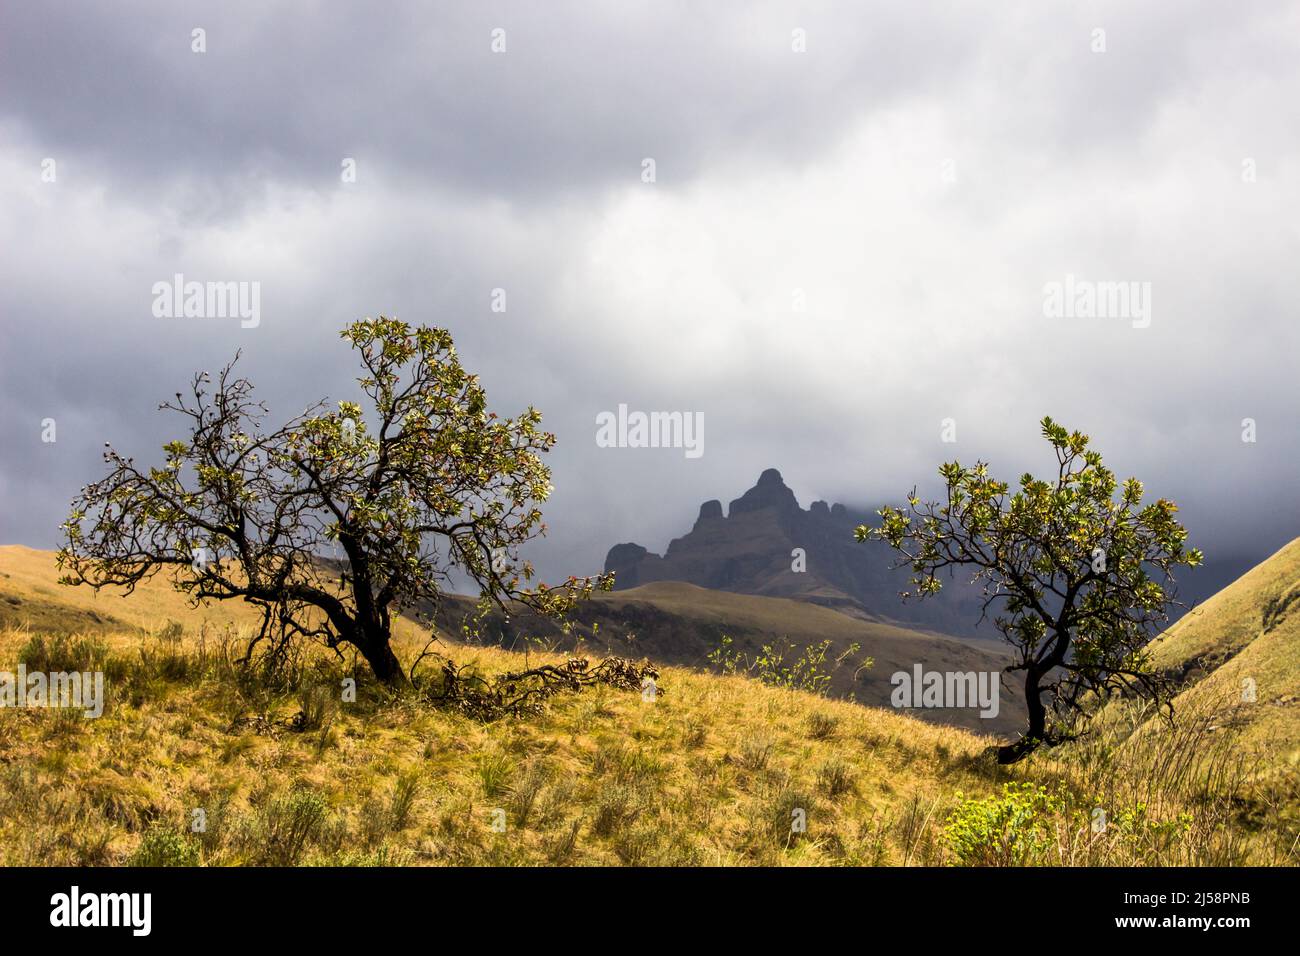 Two common sugar bush protea bushes,  in the Drakensberg Mountains, against a dark storm gathering around the peaks in the background Stock Photo